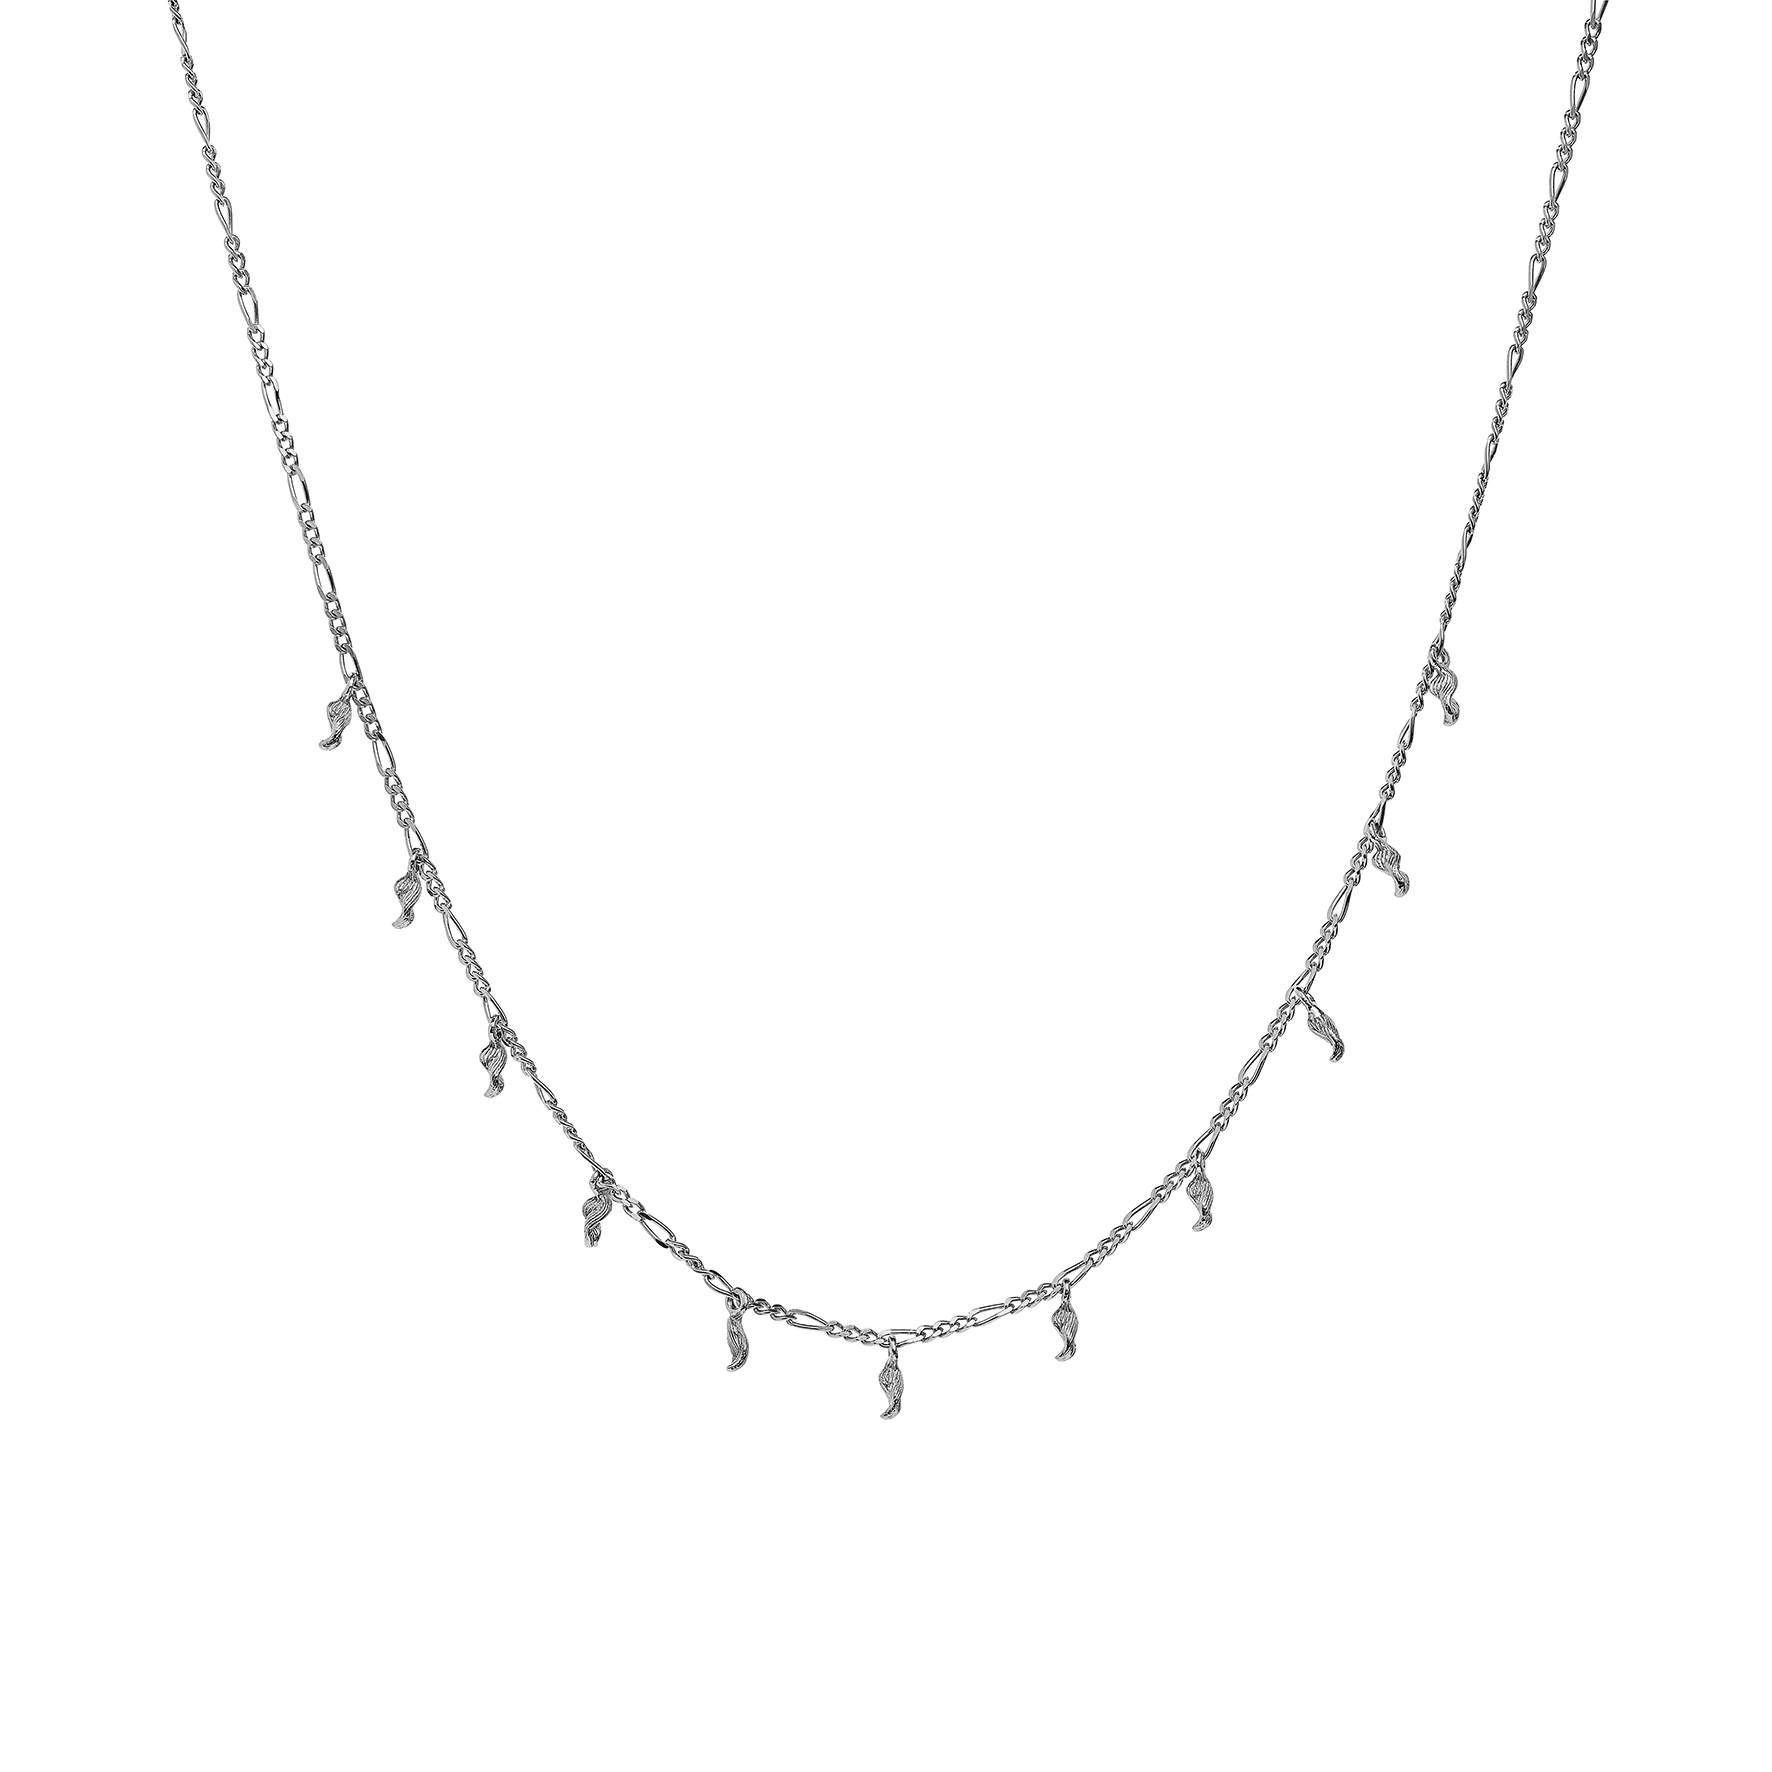 Jules Necklace from Maanesten in Silver Sterling 925